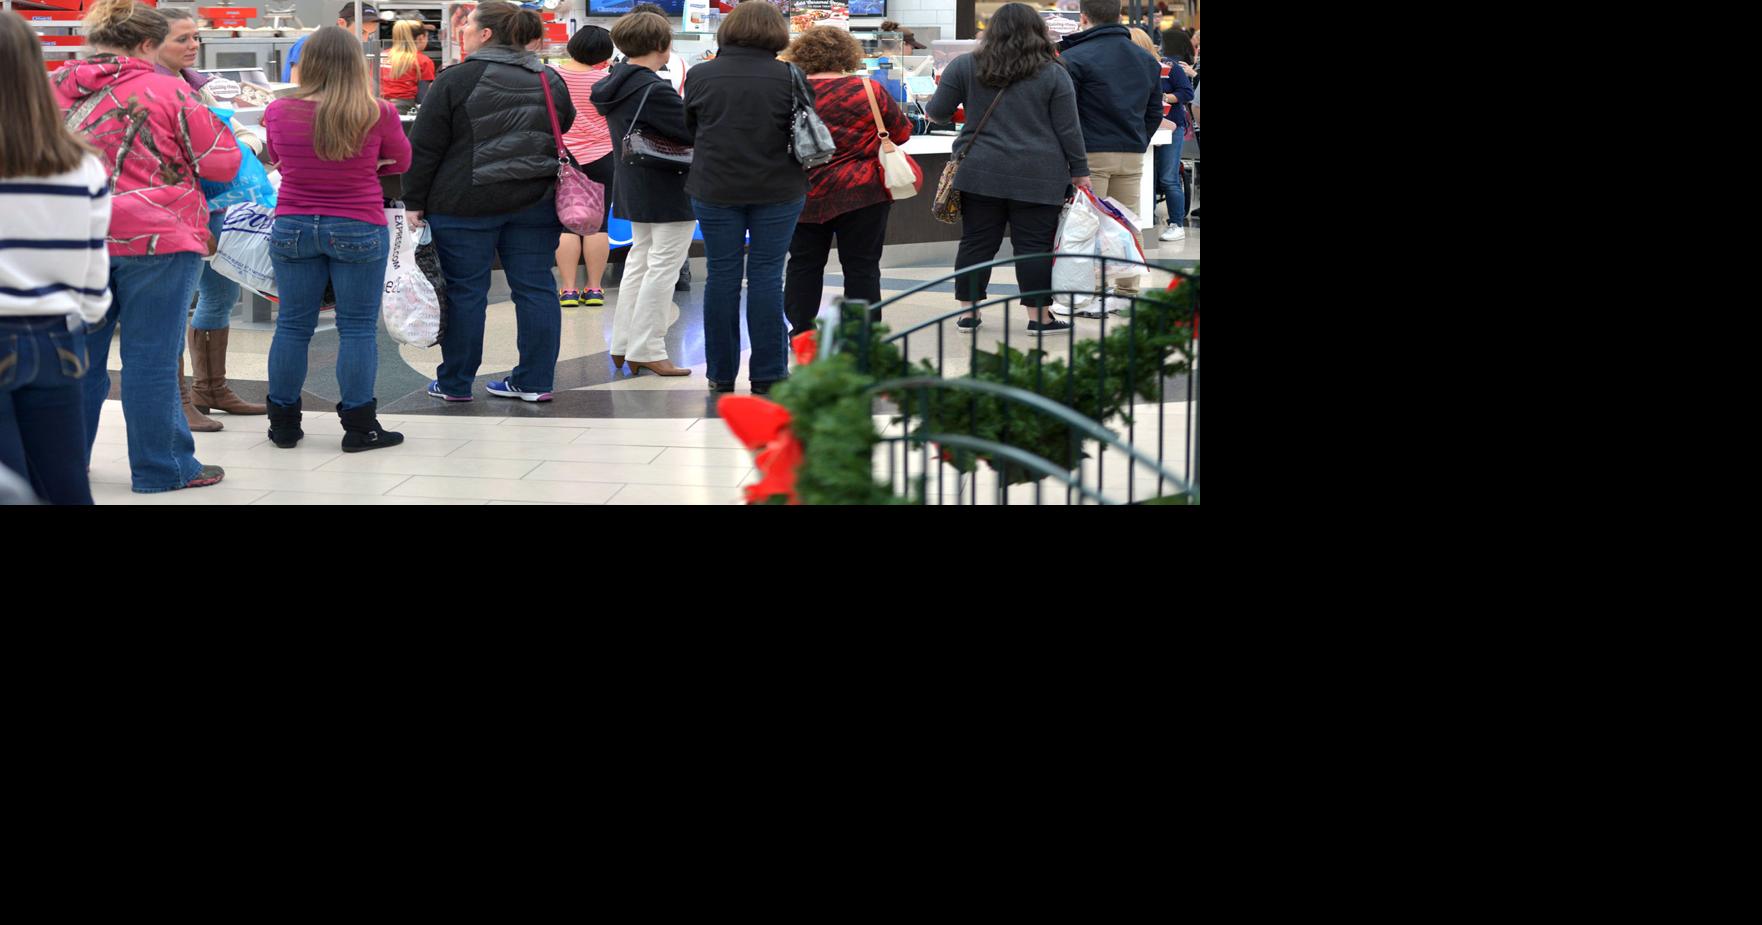 Black Friday turnout starts slower but ends strong, Lancaster County